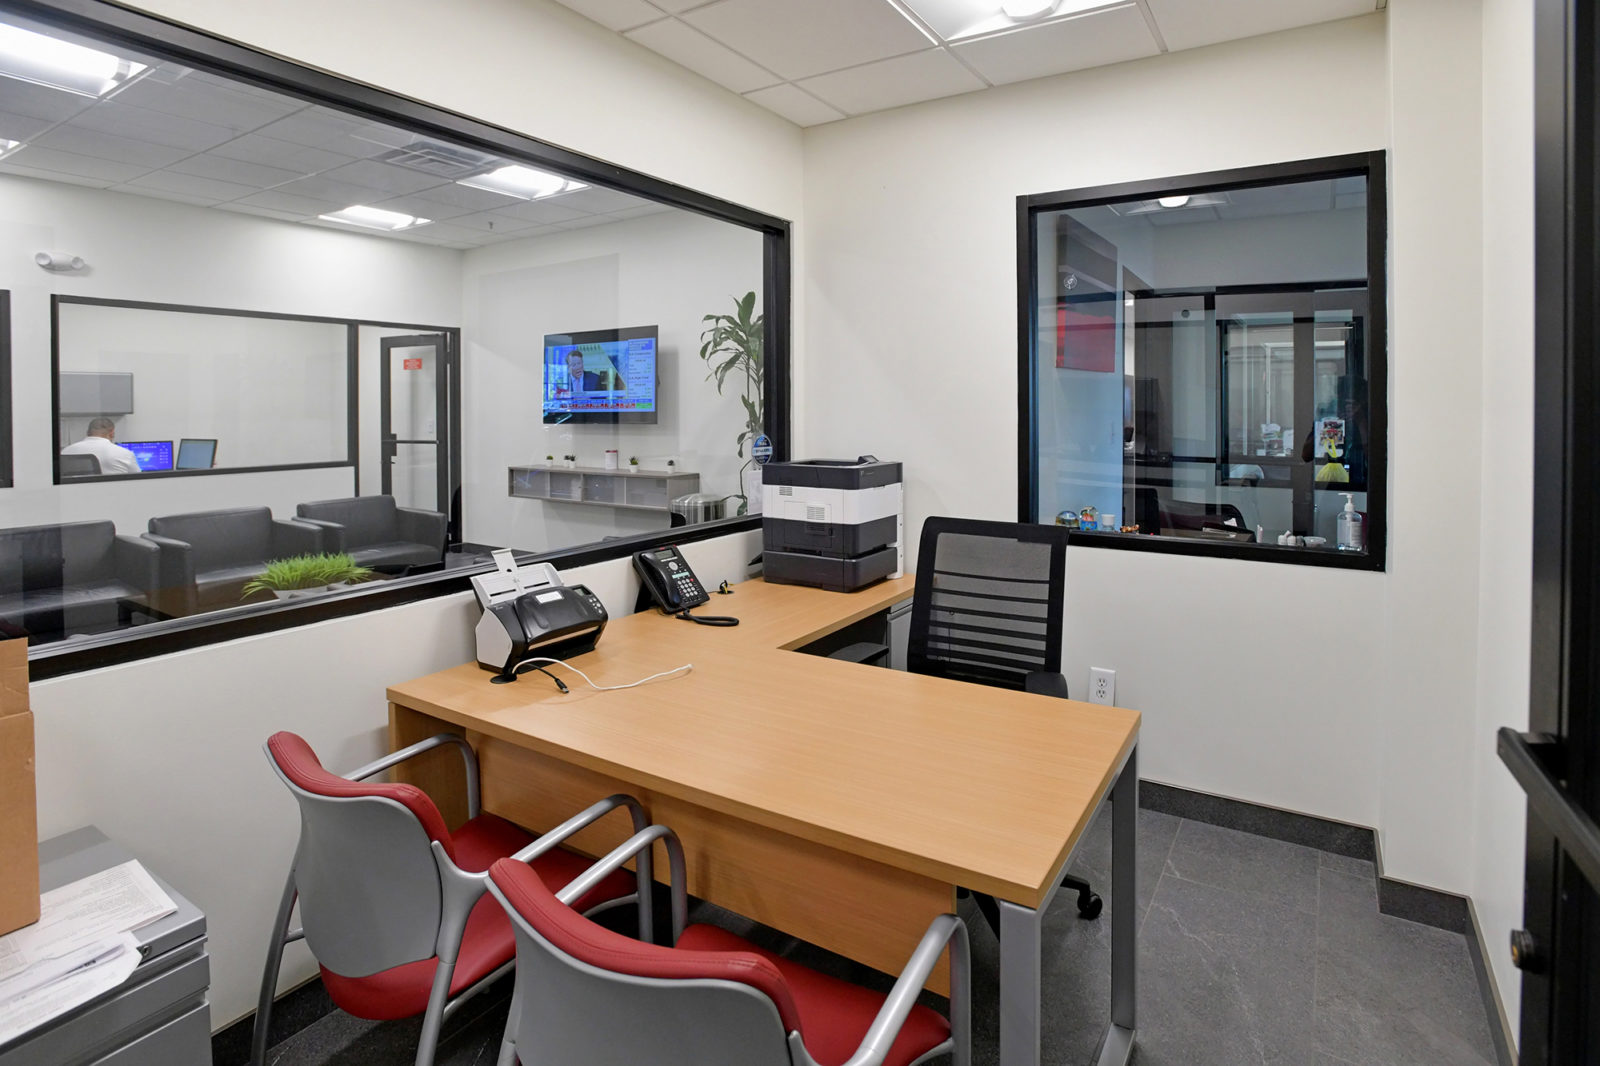 Private office with L-shape wood-grain desk, 2 red guest chairs and black task chair. There are 2 large windows in the office.